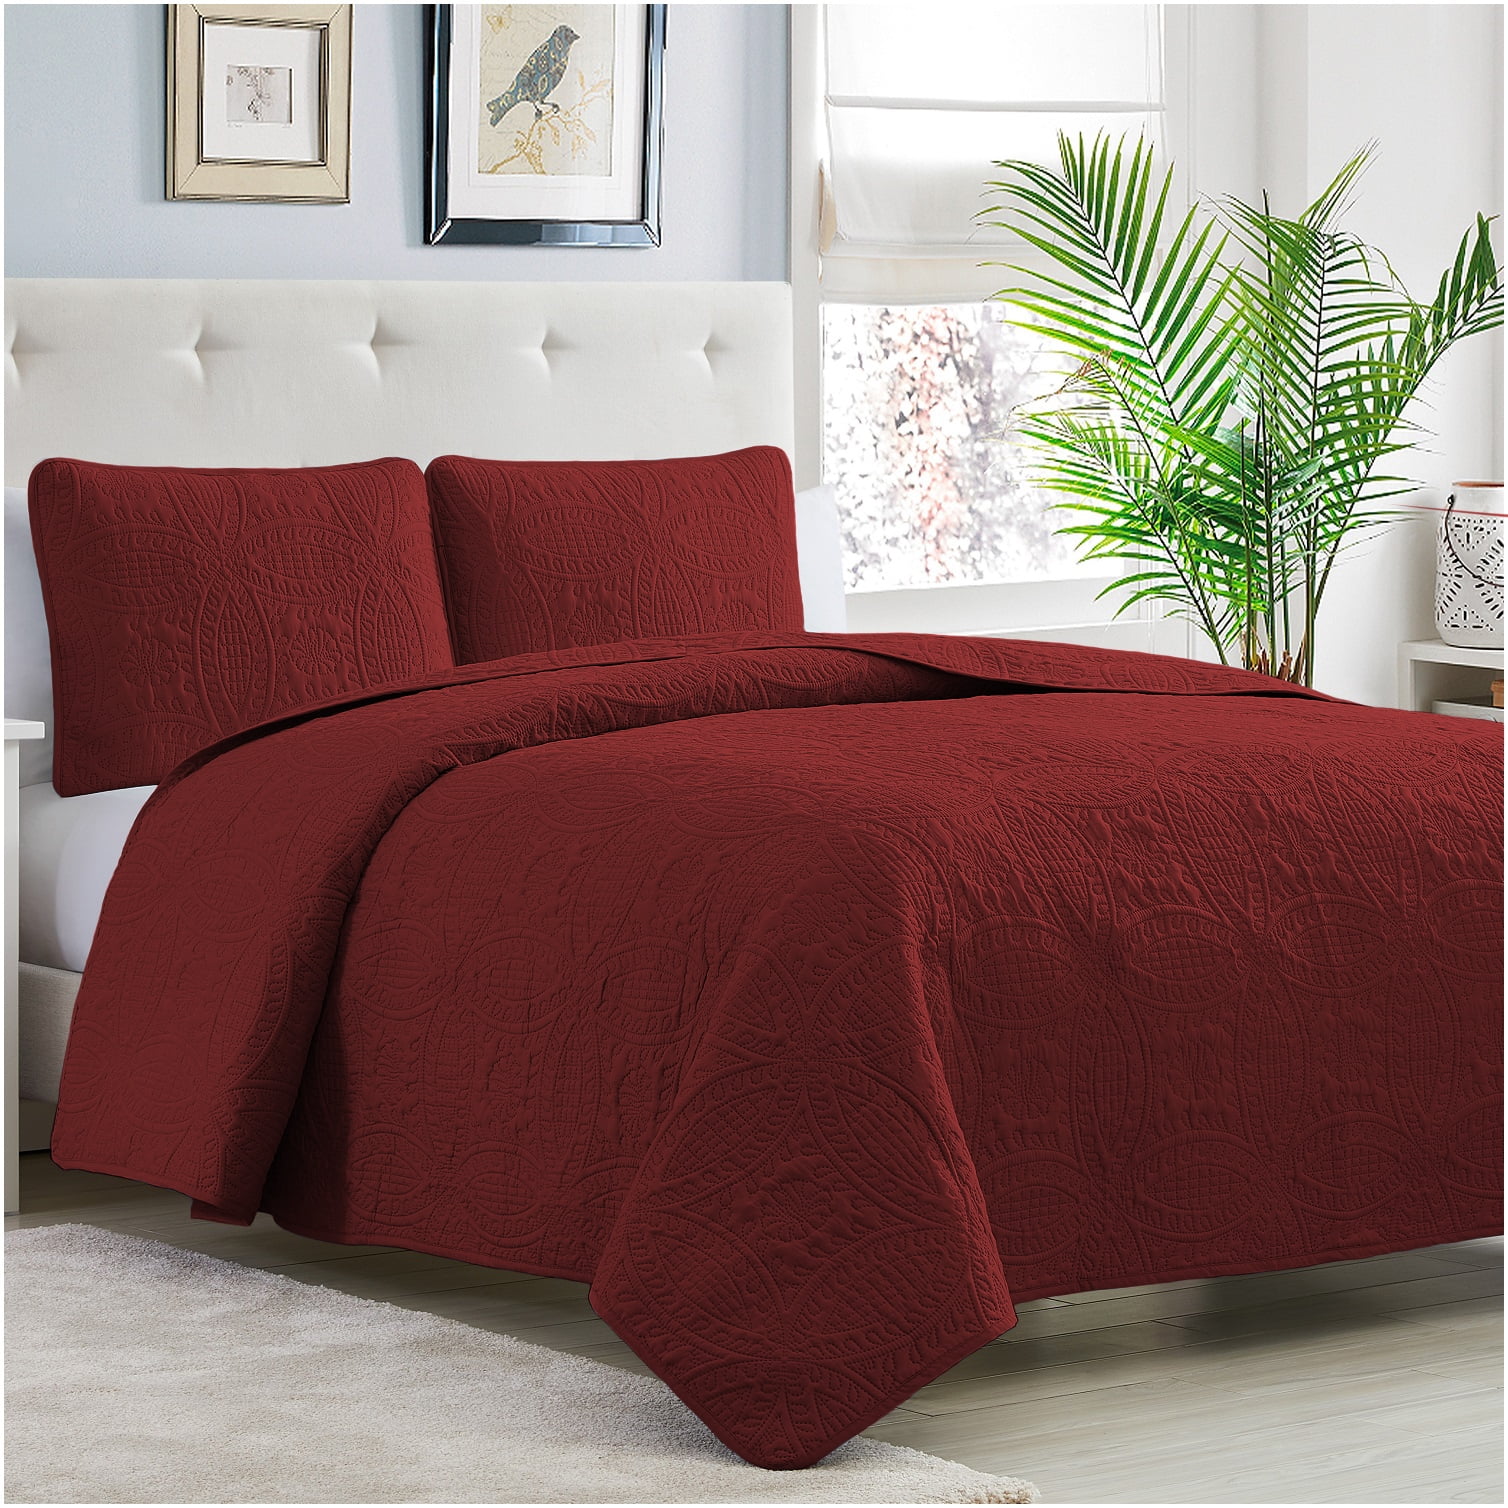 Details about   Tremendous Bedding Drop Length Bed Skirt Organic Cotton Olympic Queen All Solid 